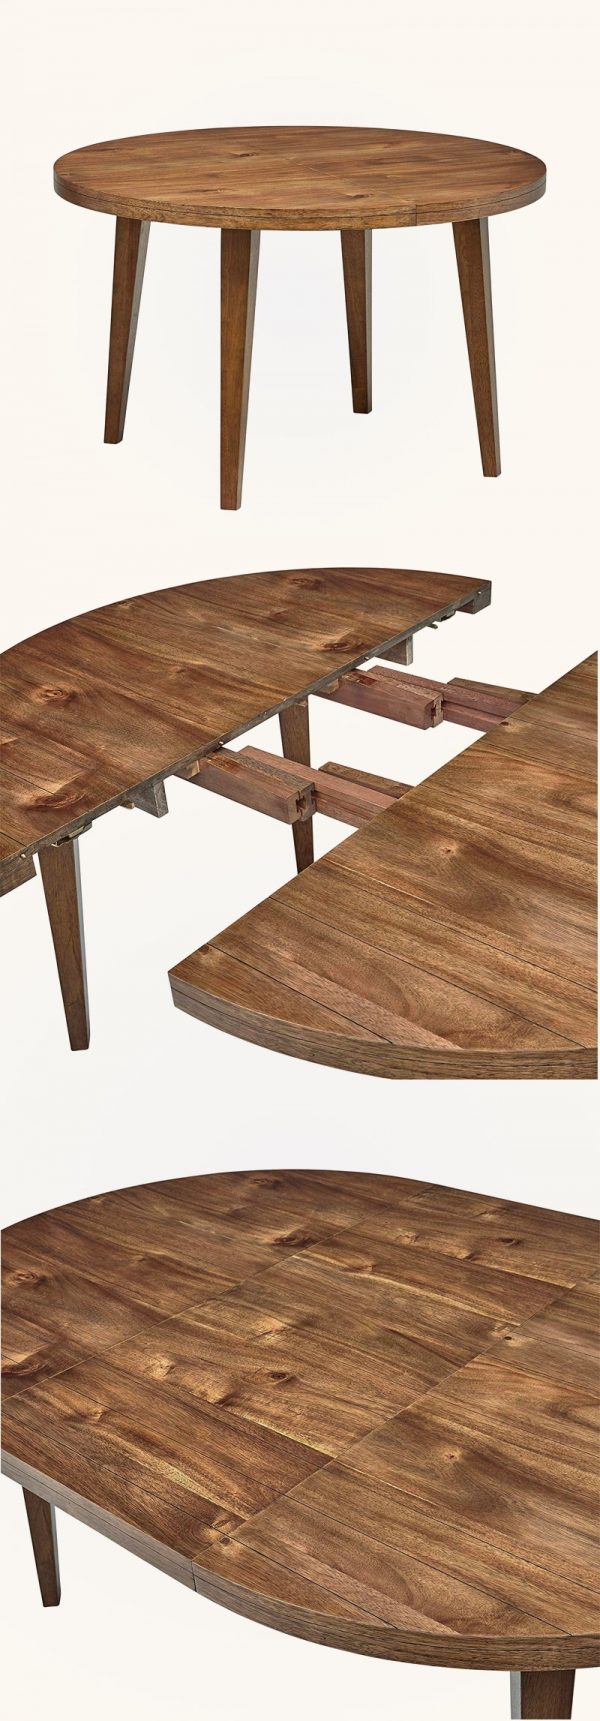 Round Extendable Dining Table Seats 10, Expandable Round Dining Room Tables